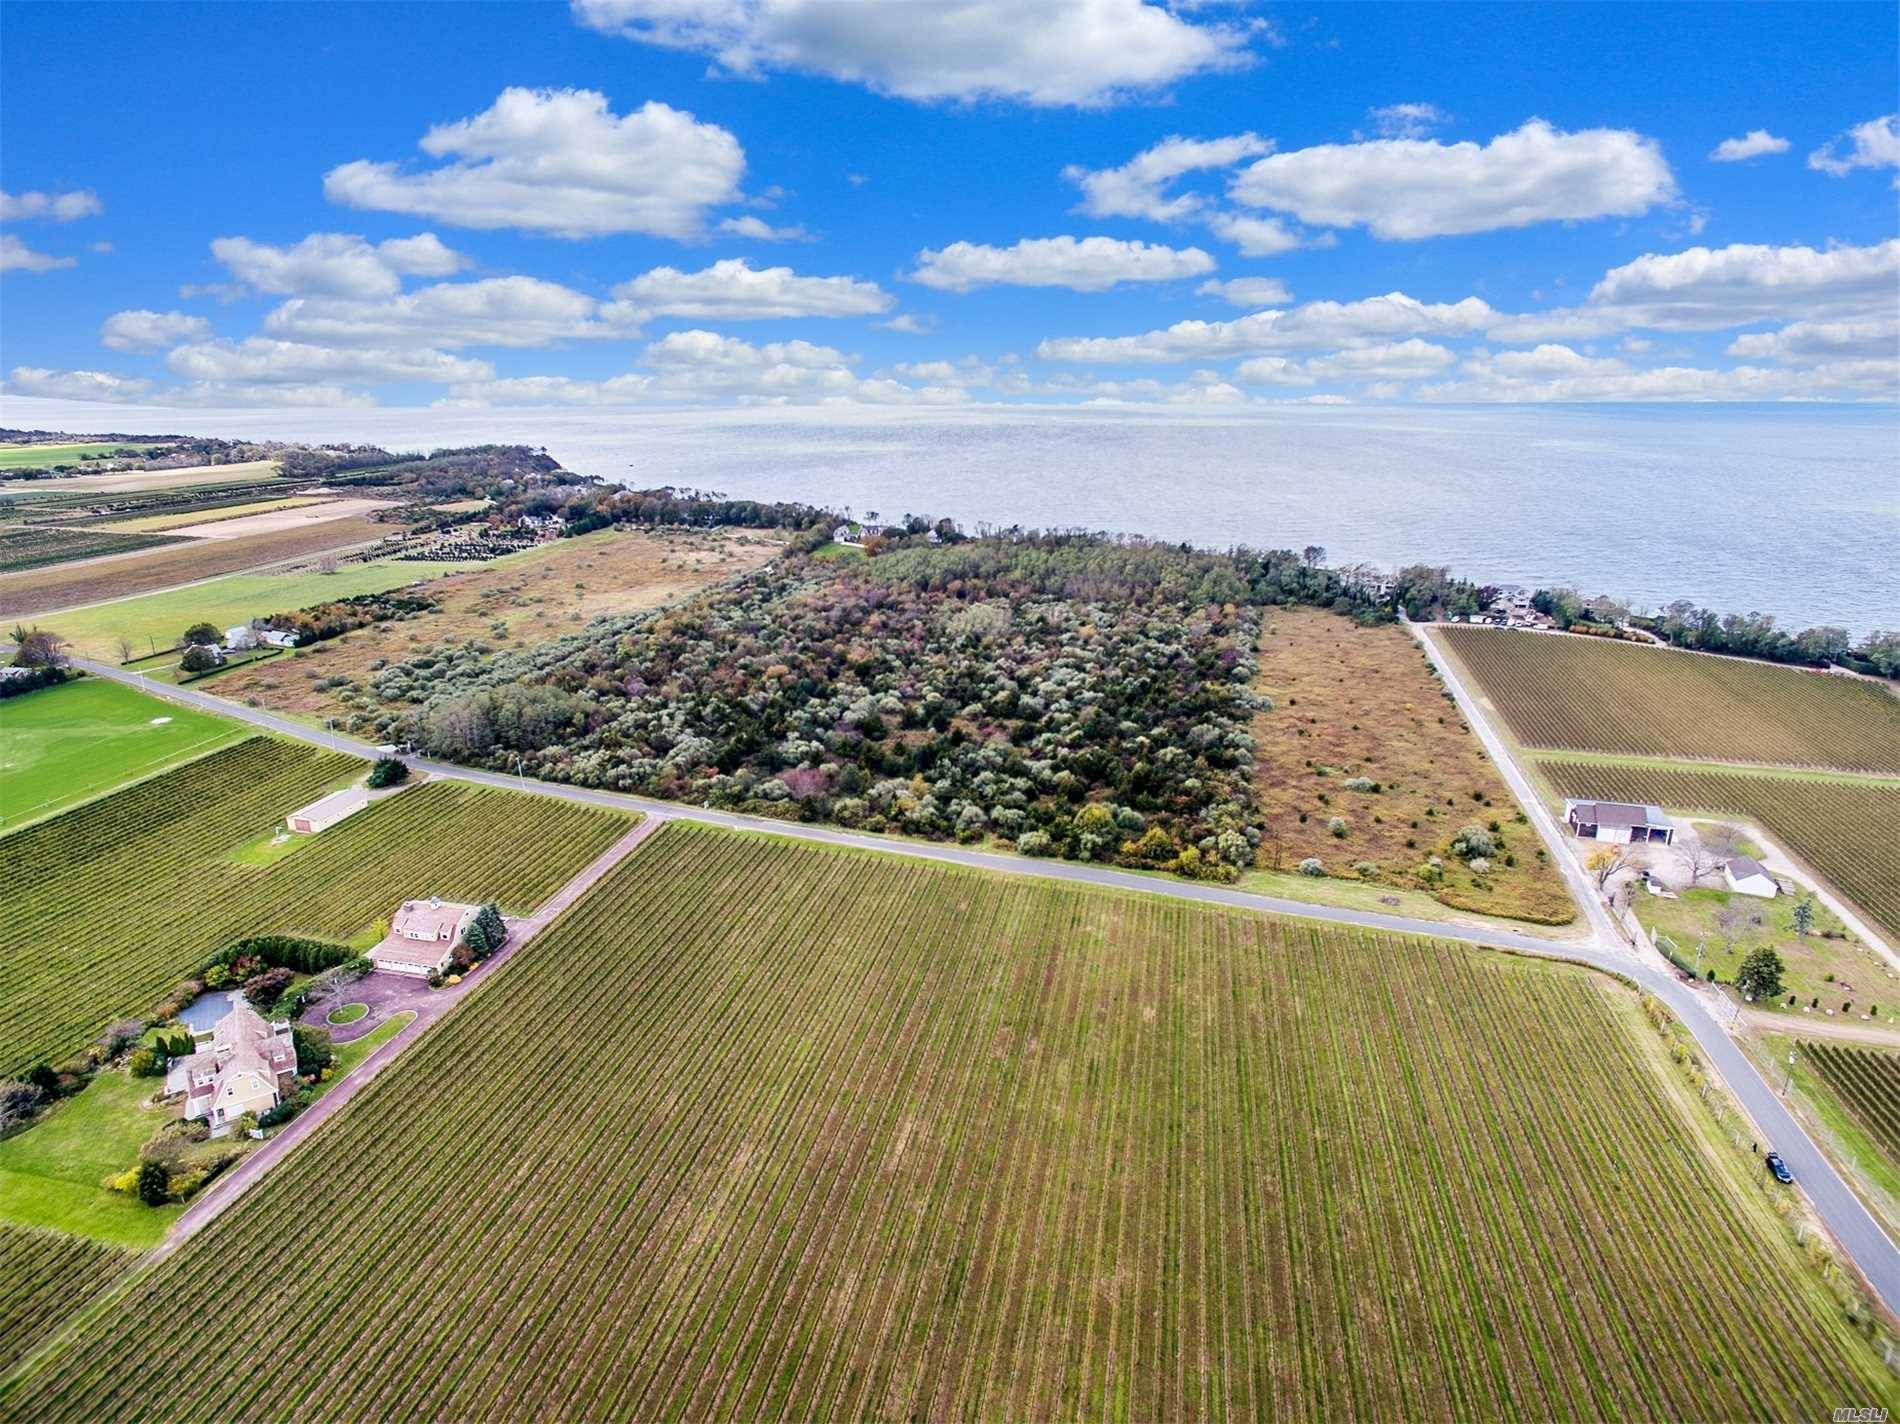 This Amazing Property Rests On Prestigious Oregon Rd And Offers Breathtaking Views All Around From Sprawling Vineyards To Farmland.